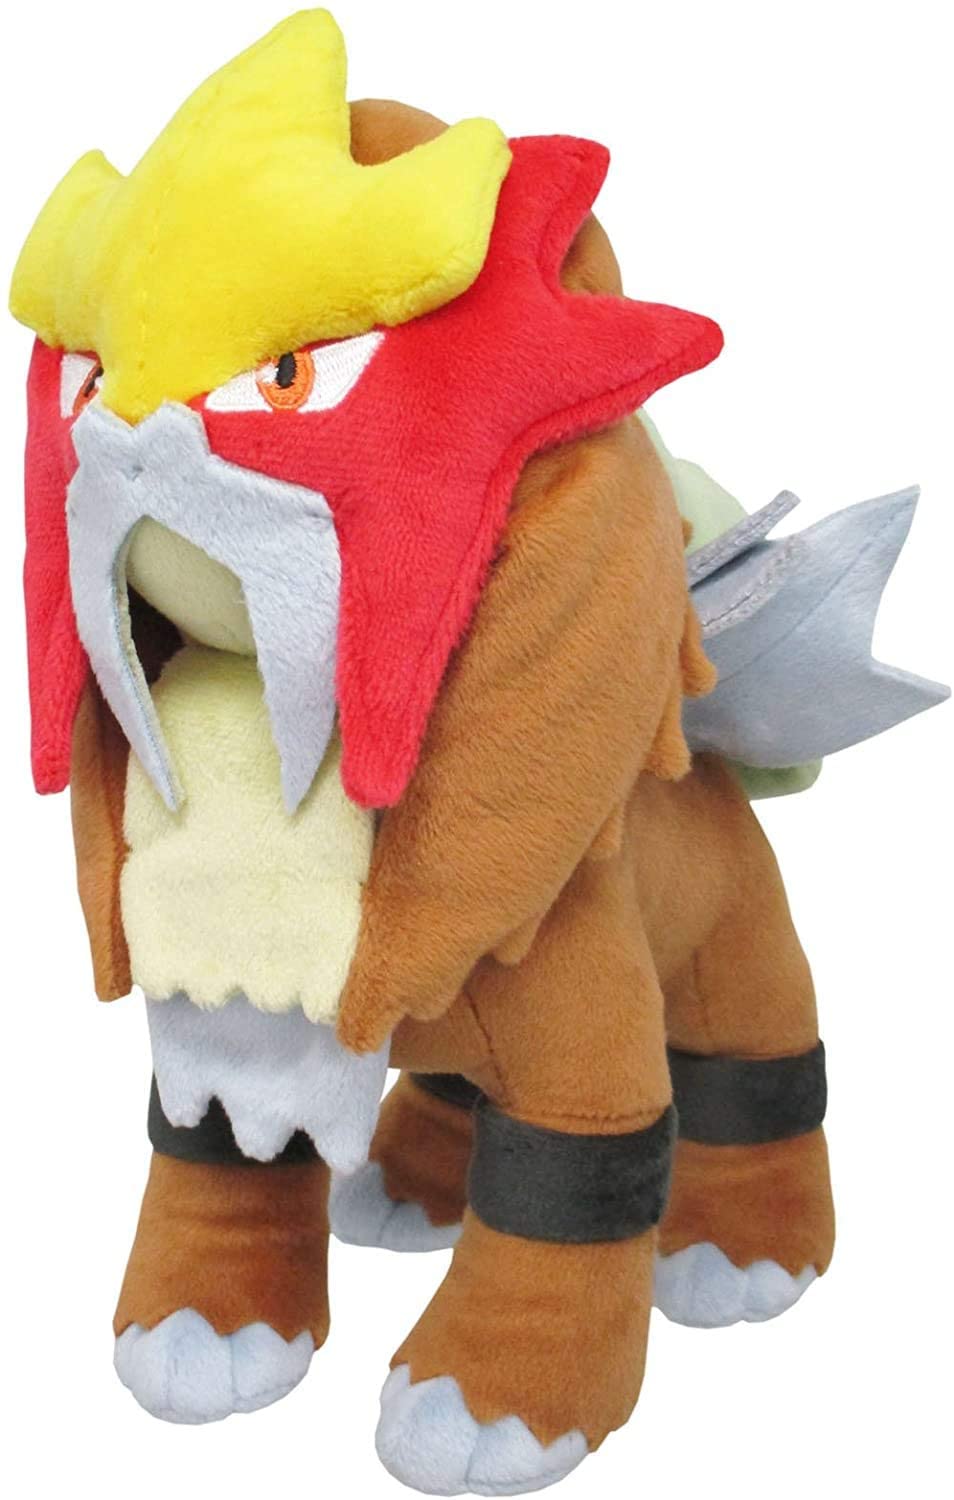 Sanei All Star Collection 10 Inch Plush - Entei PP063